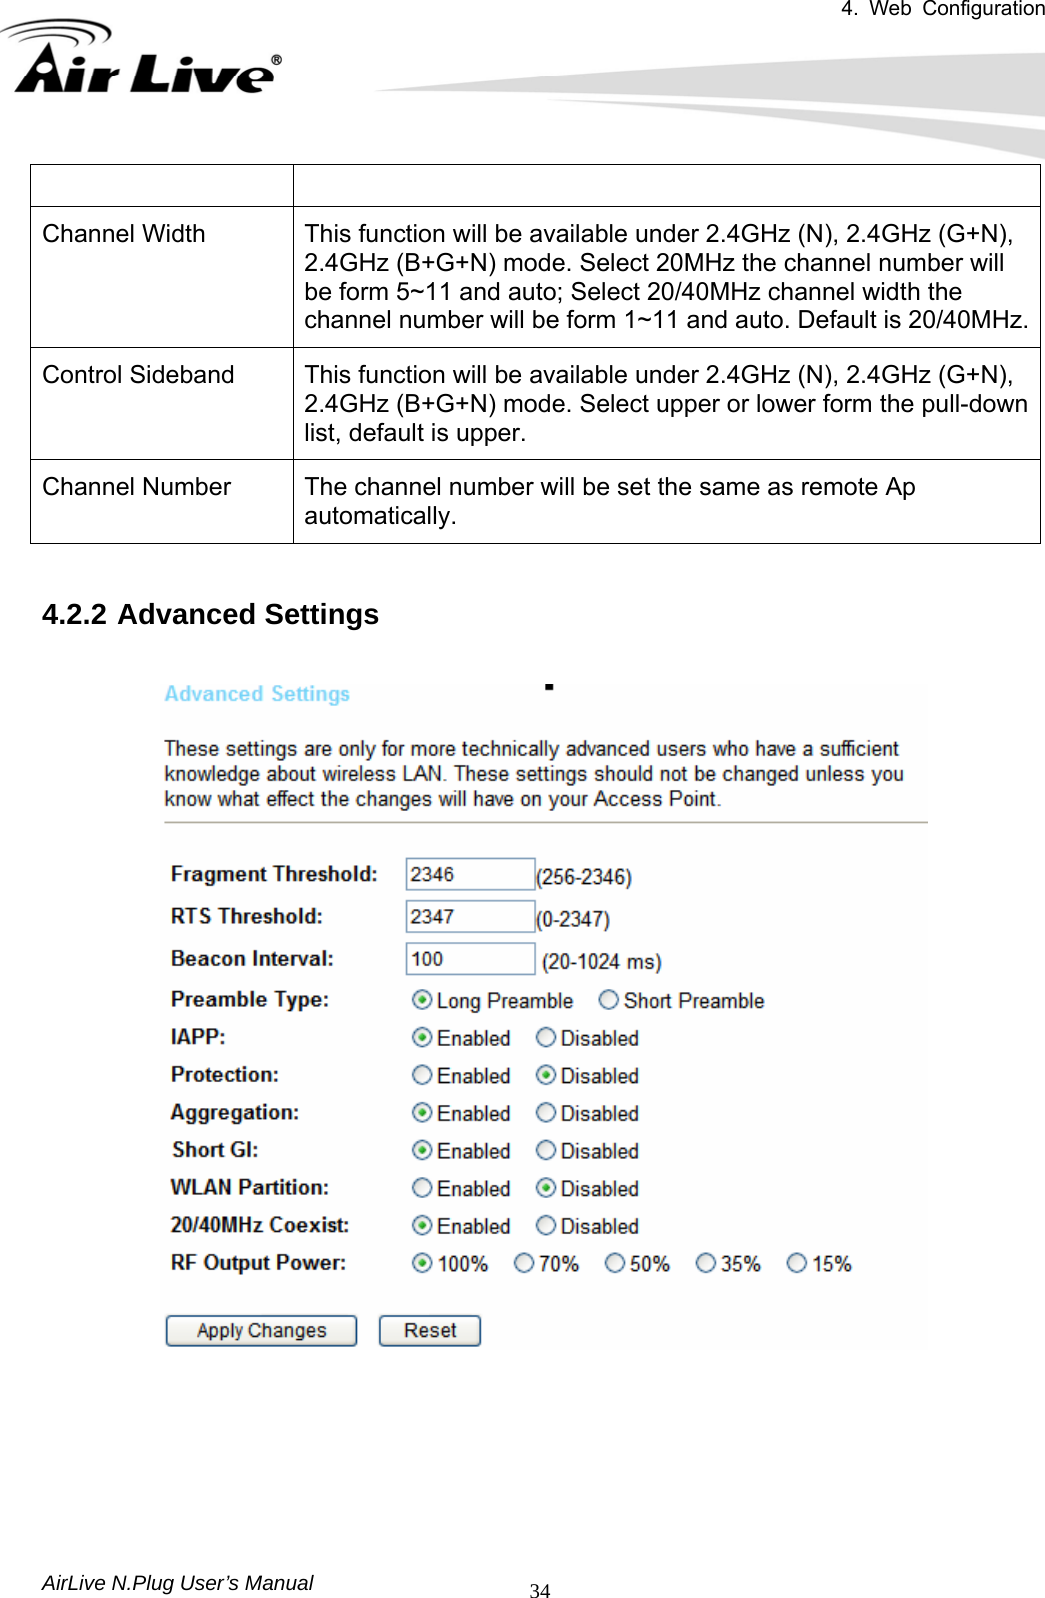 4. Web Configuration       AirLive N.Plug User’s Manual  34 Channel Width  This function will be available under 2.4GHz (N), 2.4GHz (G+N), 2.4GHz (B+G+N) mode. Select 20MHz the channel number will be form 5~11 and auto; Select 20/40MHz channel width the channel number will be form 1~11 and auto. Default is 20/40MHz.Control Sideband  This function will be available under 2.4GHz (N), 2.4GHz (G+N), 2.4GHz (B+G+N) mode. Select upper or lower form the pull-down list, default is upper. Channel Number  The channel number will be set the same as remote Ap automatically.  4.2.2 Advanced Settings        